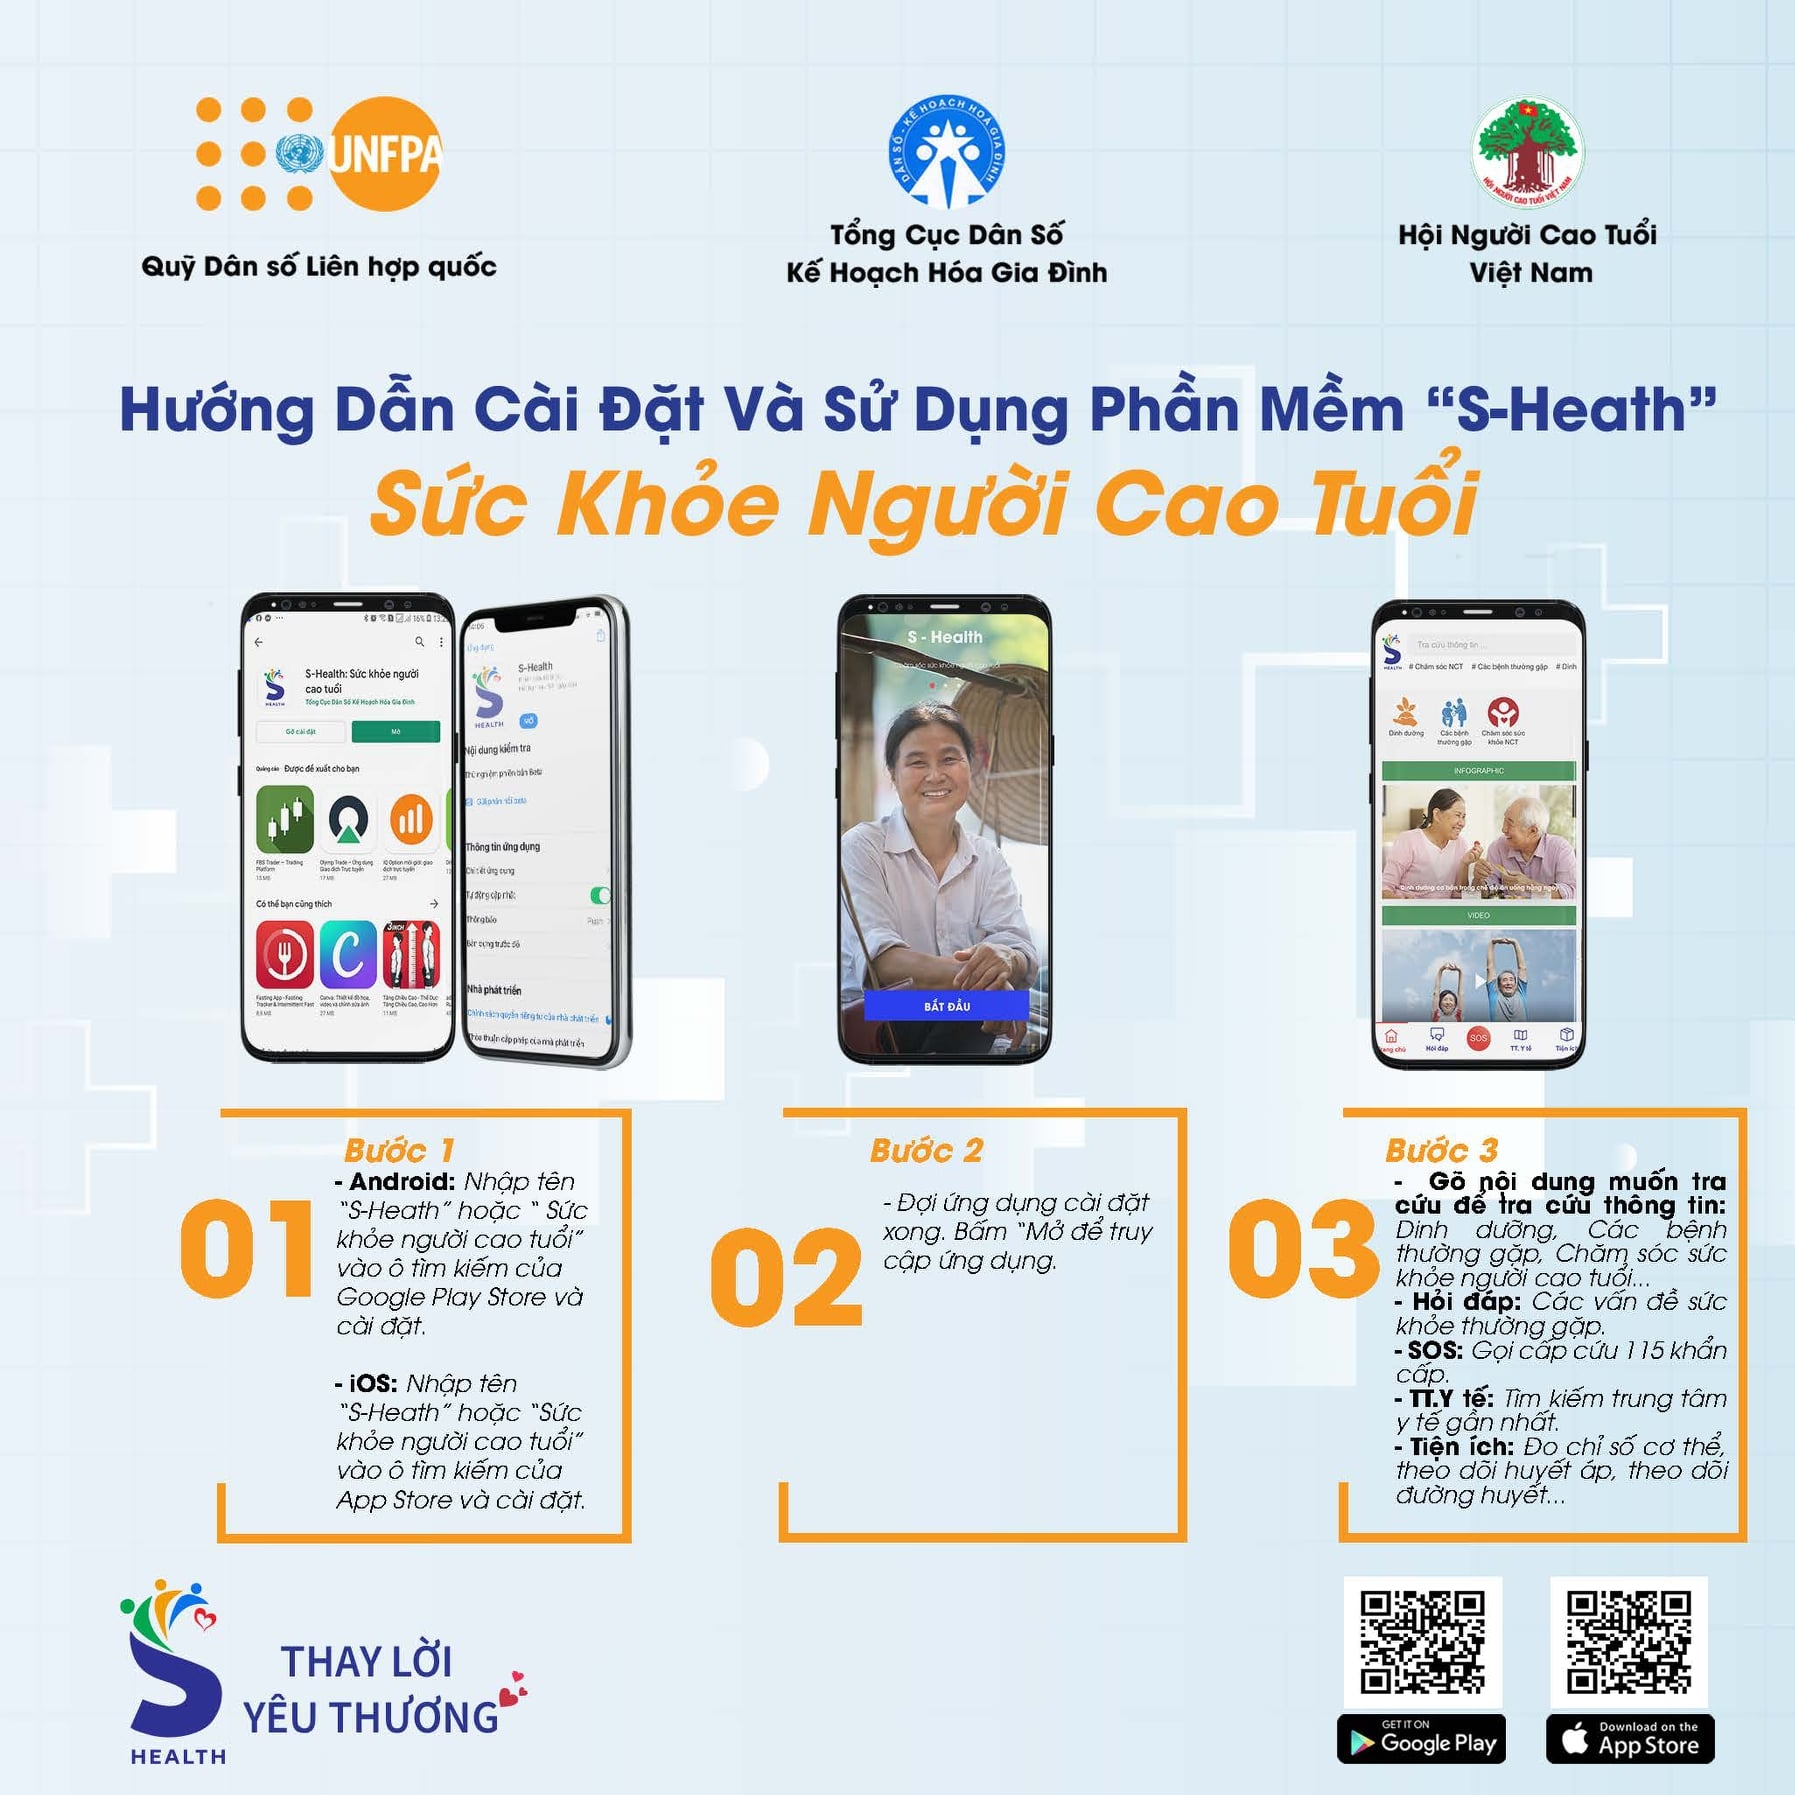 First ever mobile app to provide health care information and services to the elderly in Vietnam